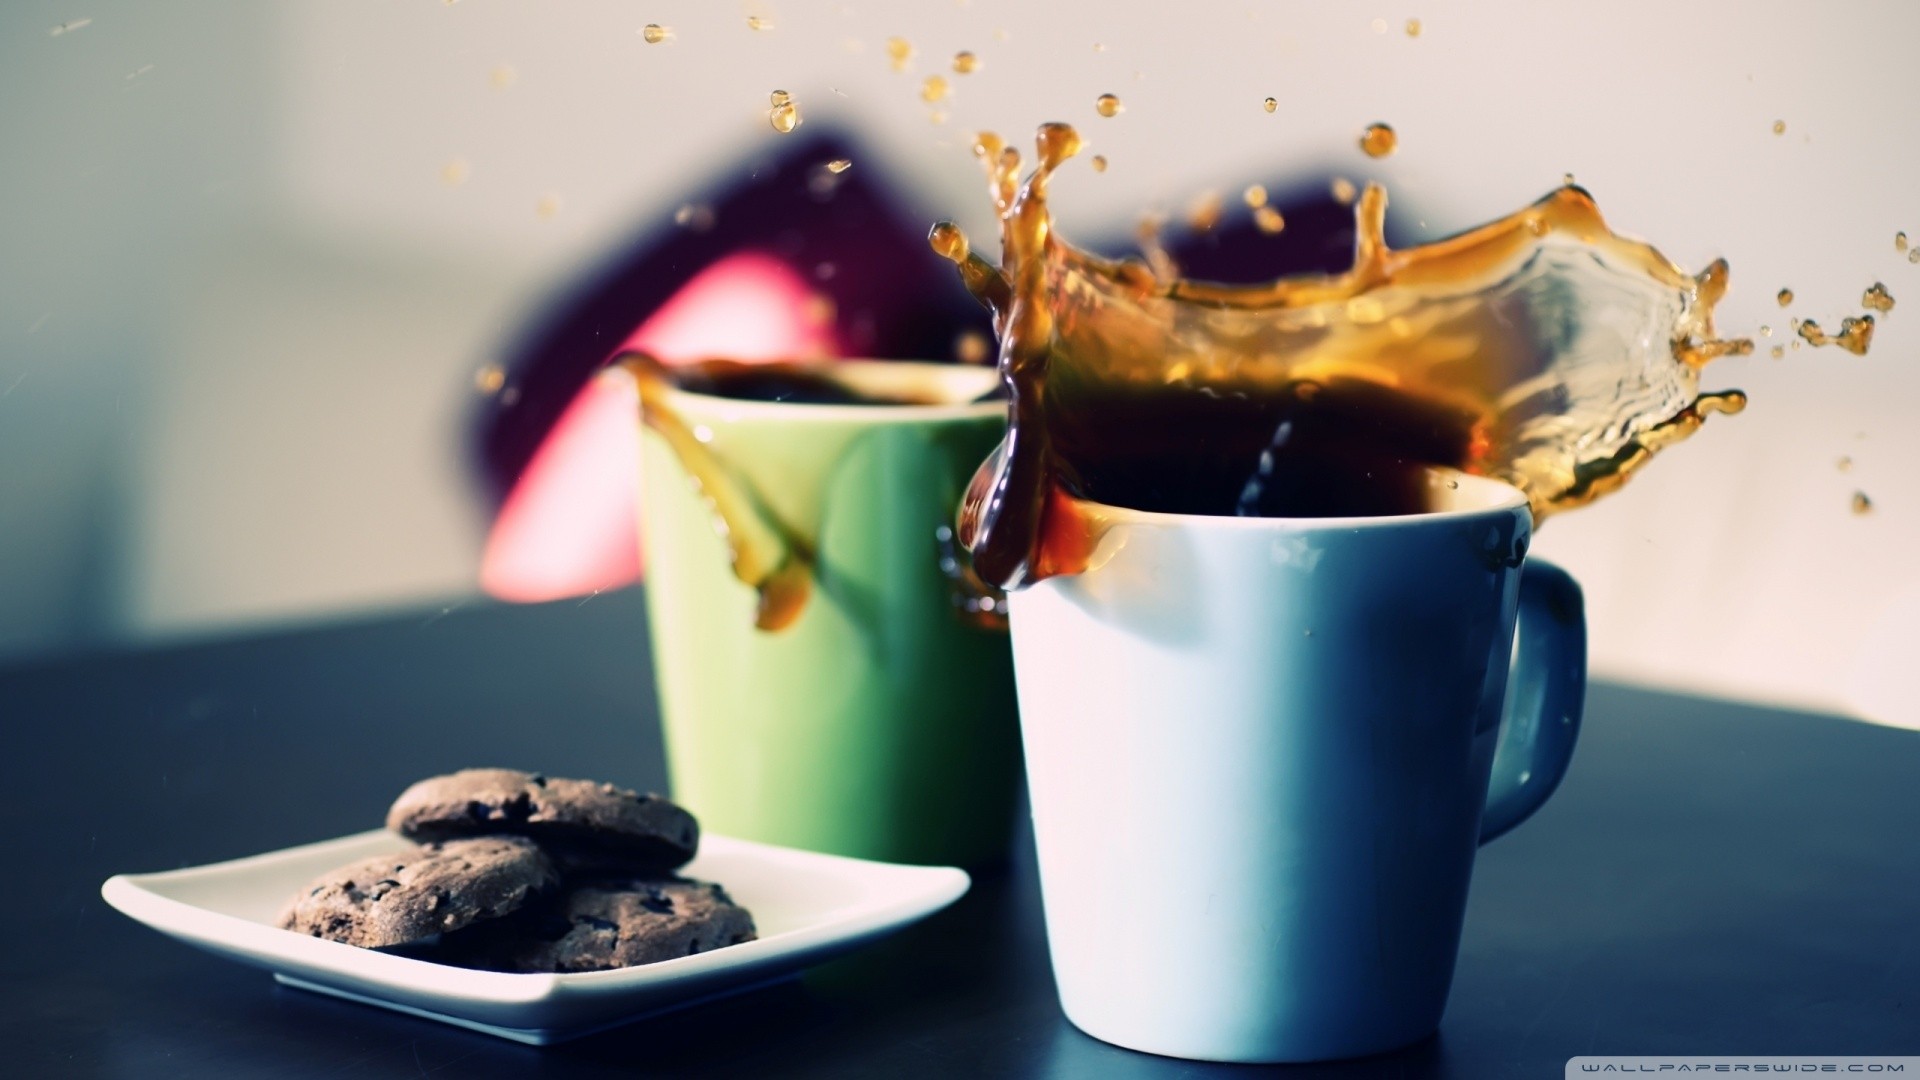 General 1920x1080 coffee cookies lunch food splashes sweets simple background liquid